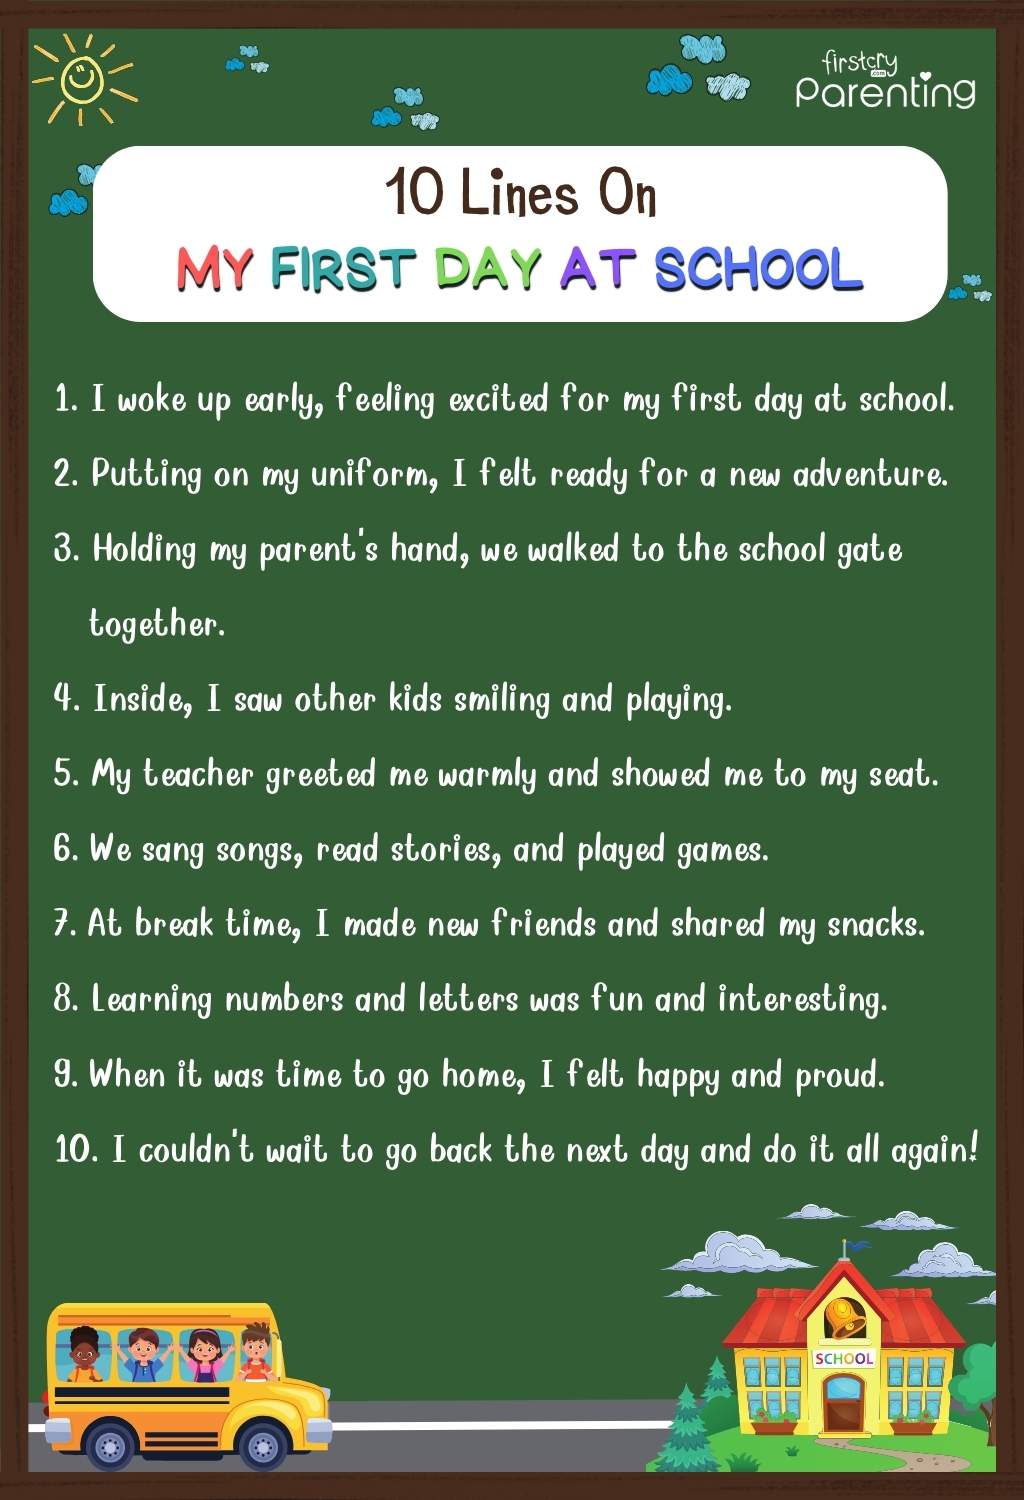 10 Lines On My First Day At School